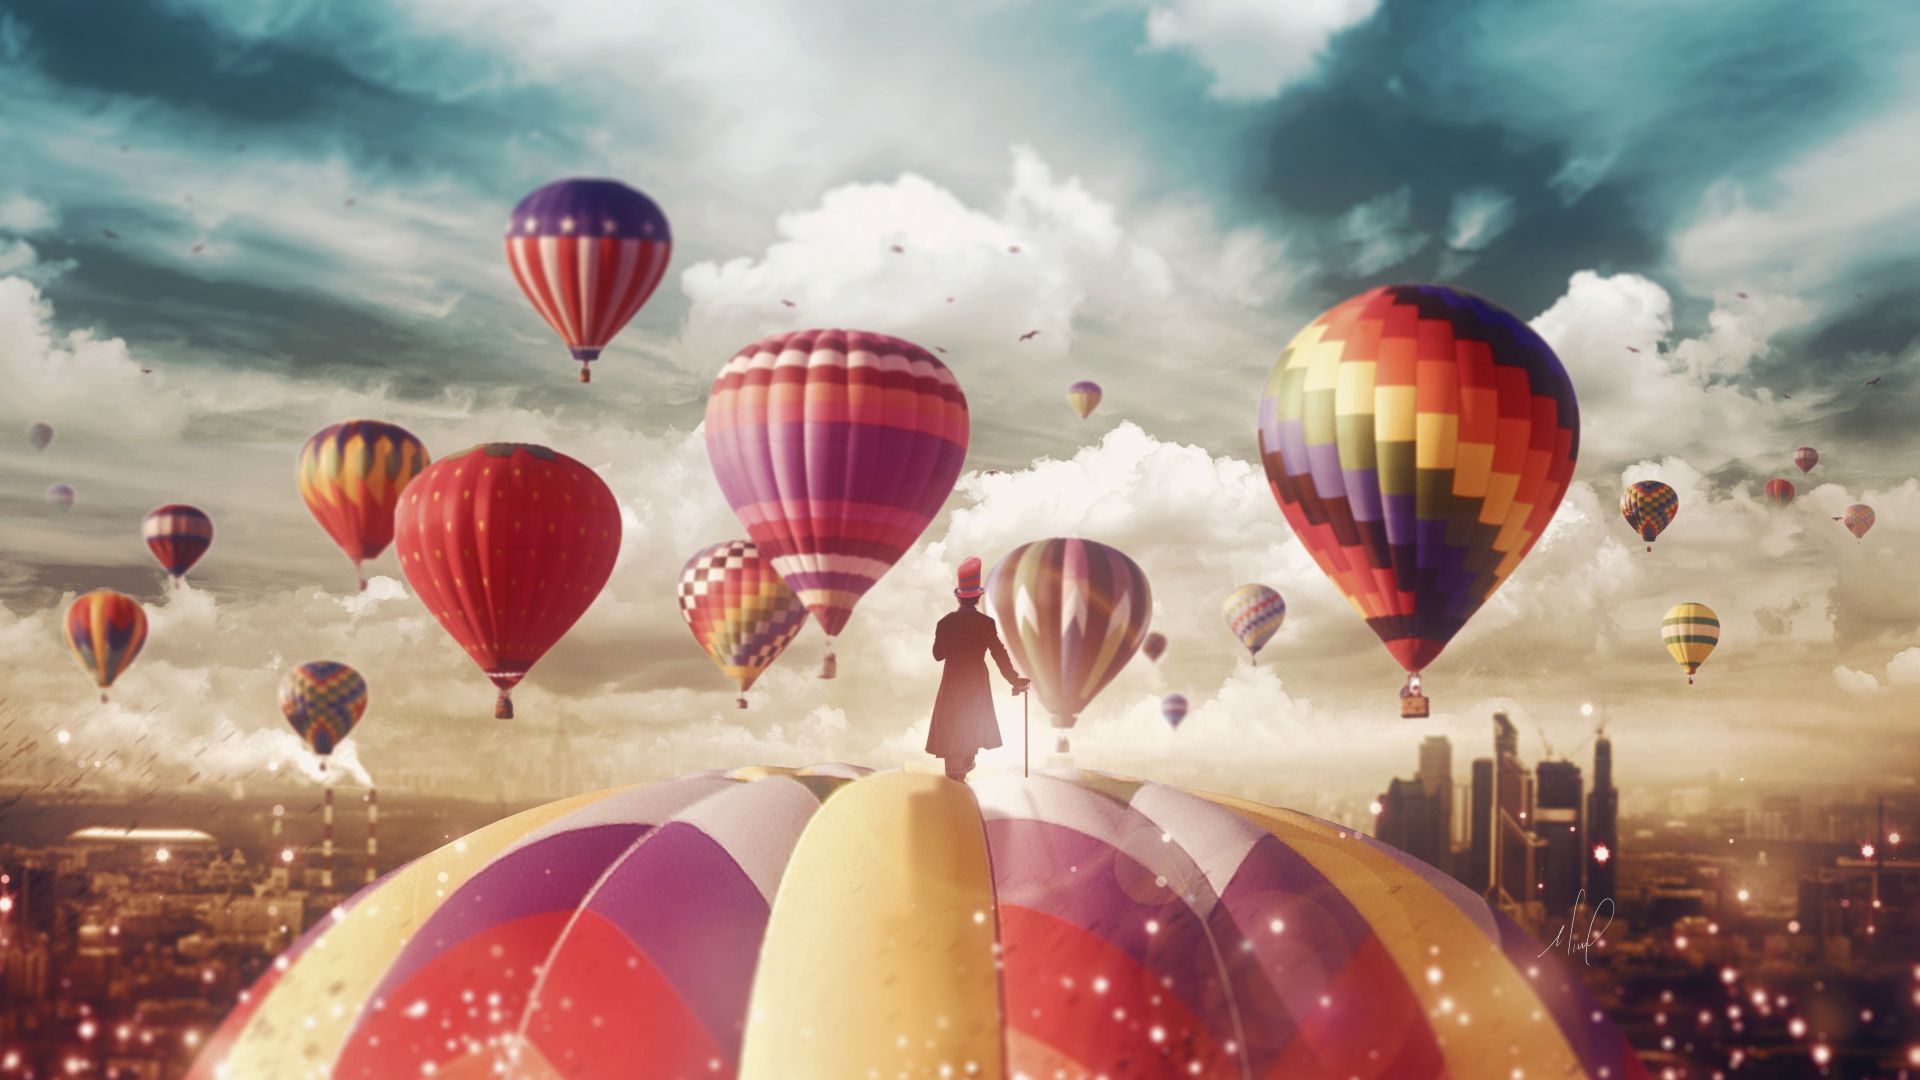 Desktop wallpaper magician, hot air balloons, ride, fantasy, surreal, HD image, picture, background, ccd62e